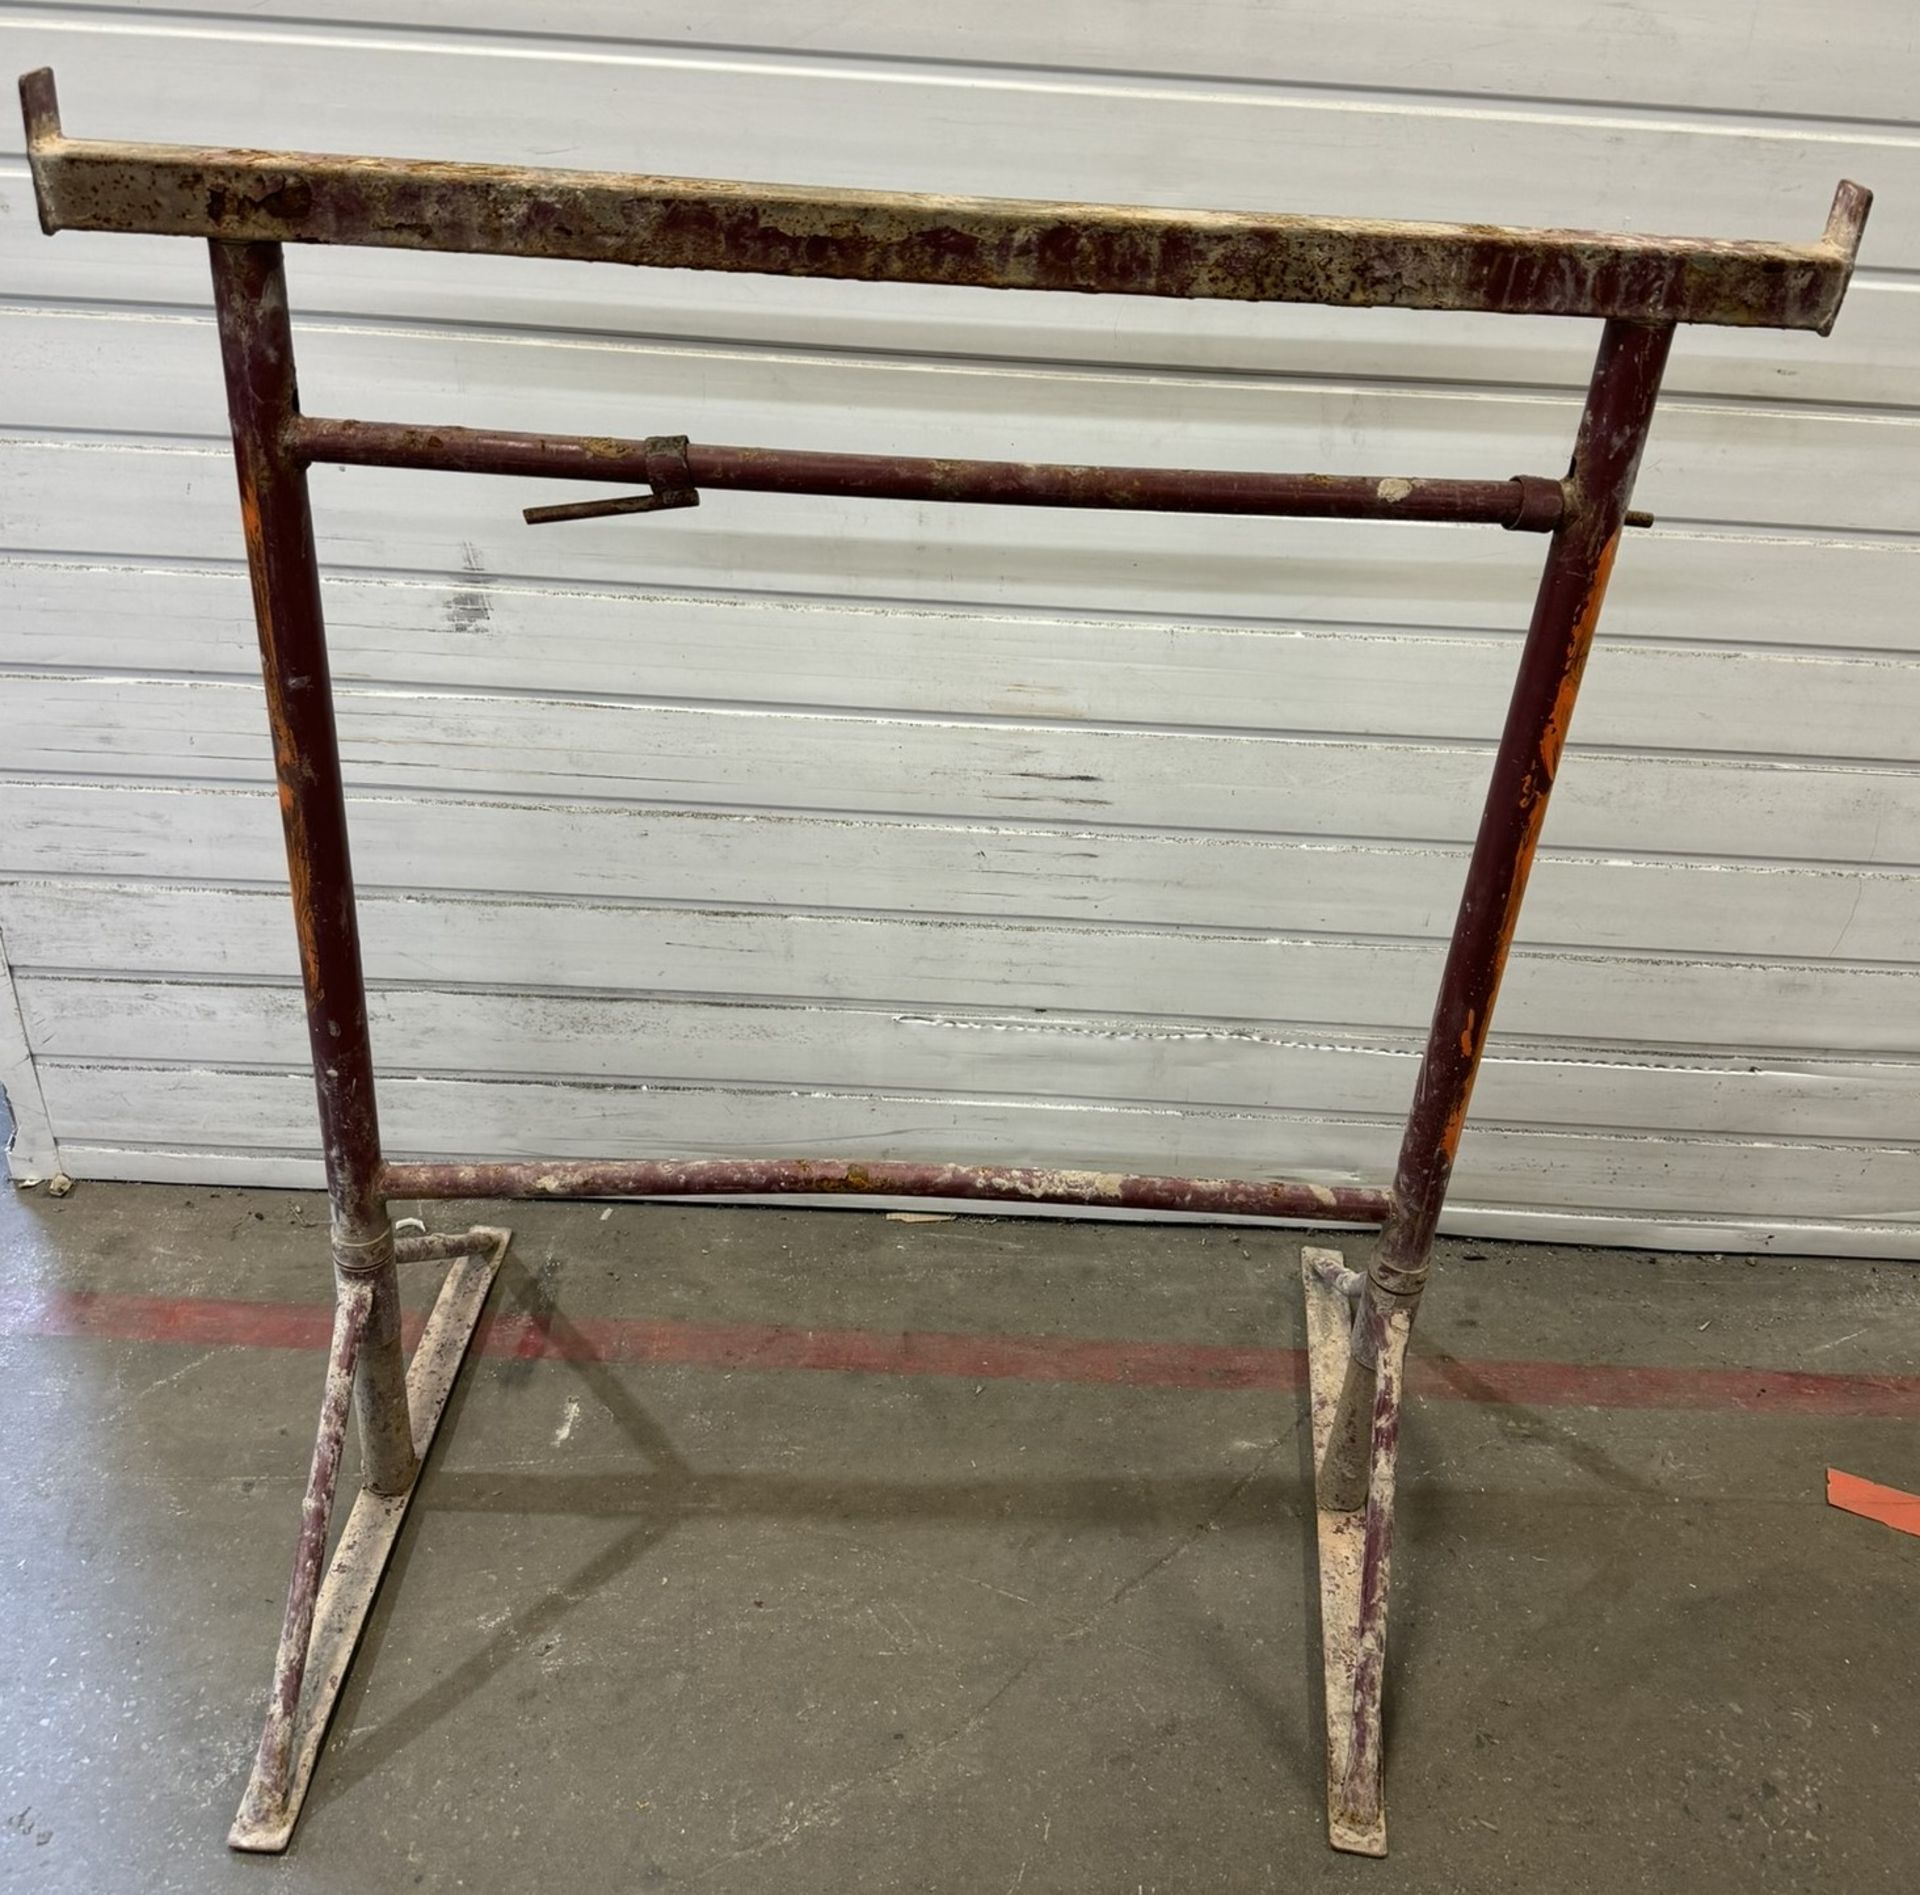 10 x Height Adjustable Trestle Stands